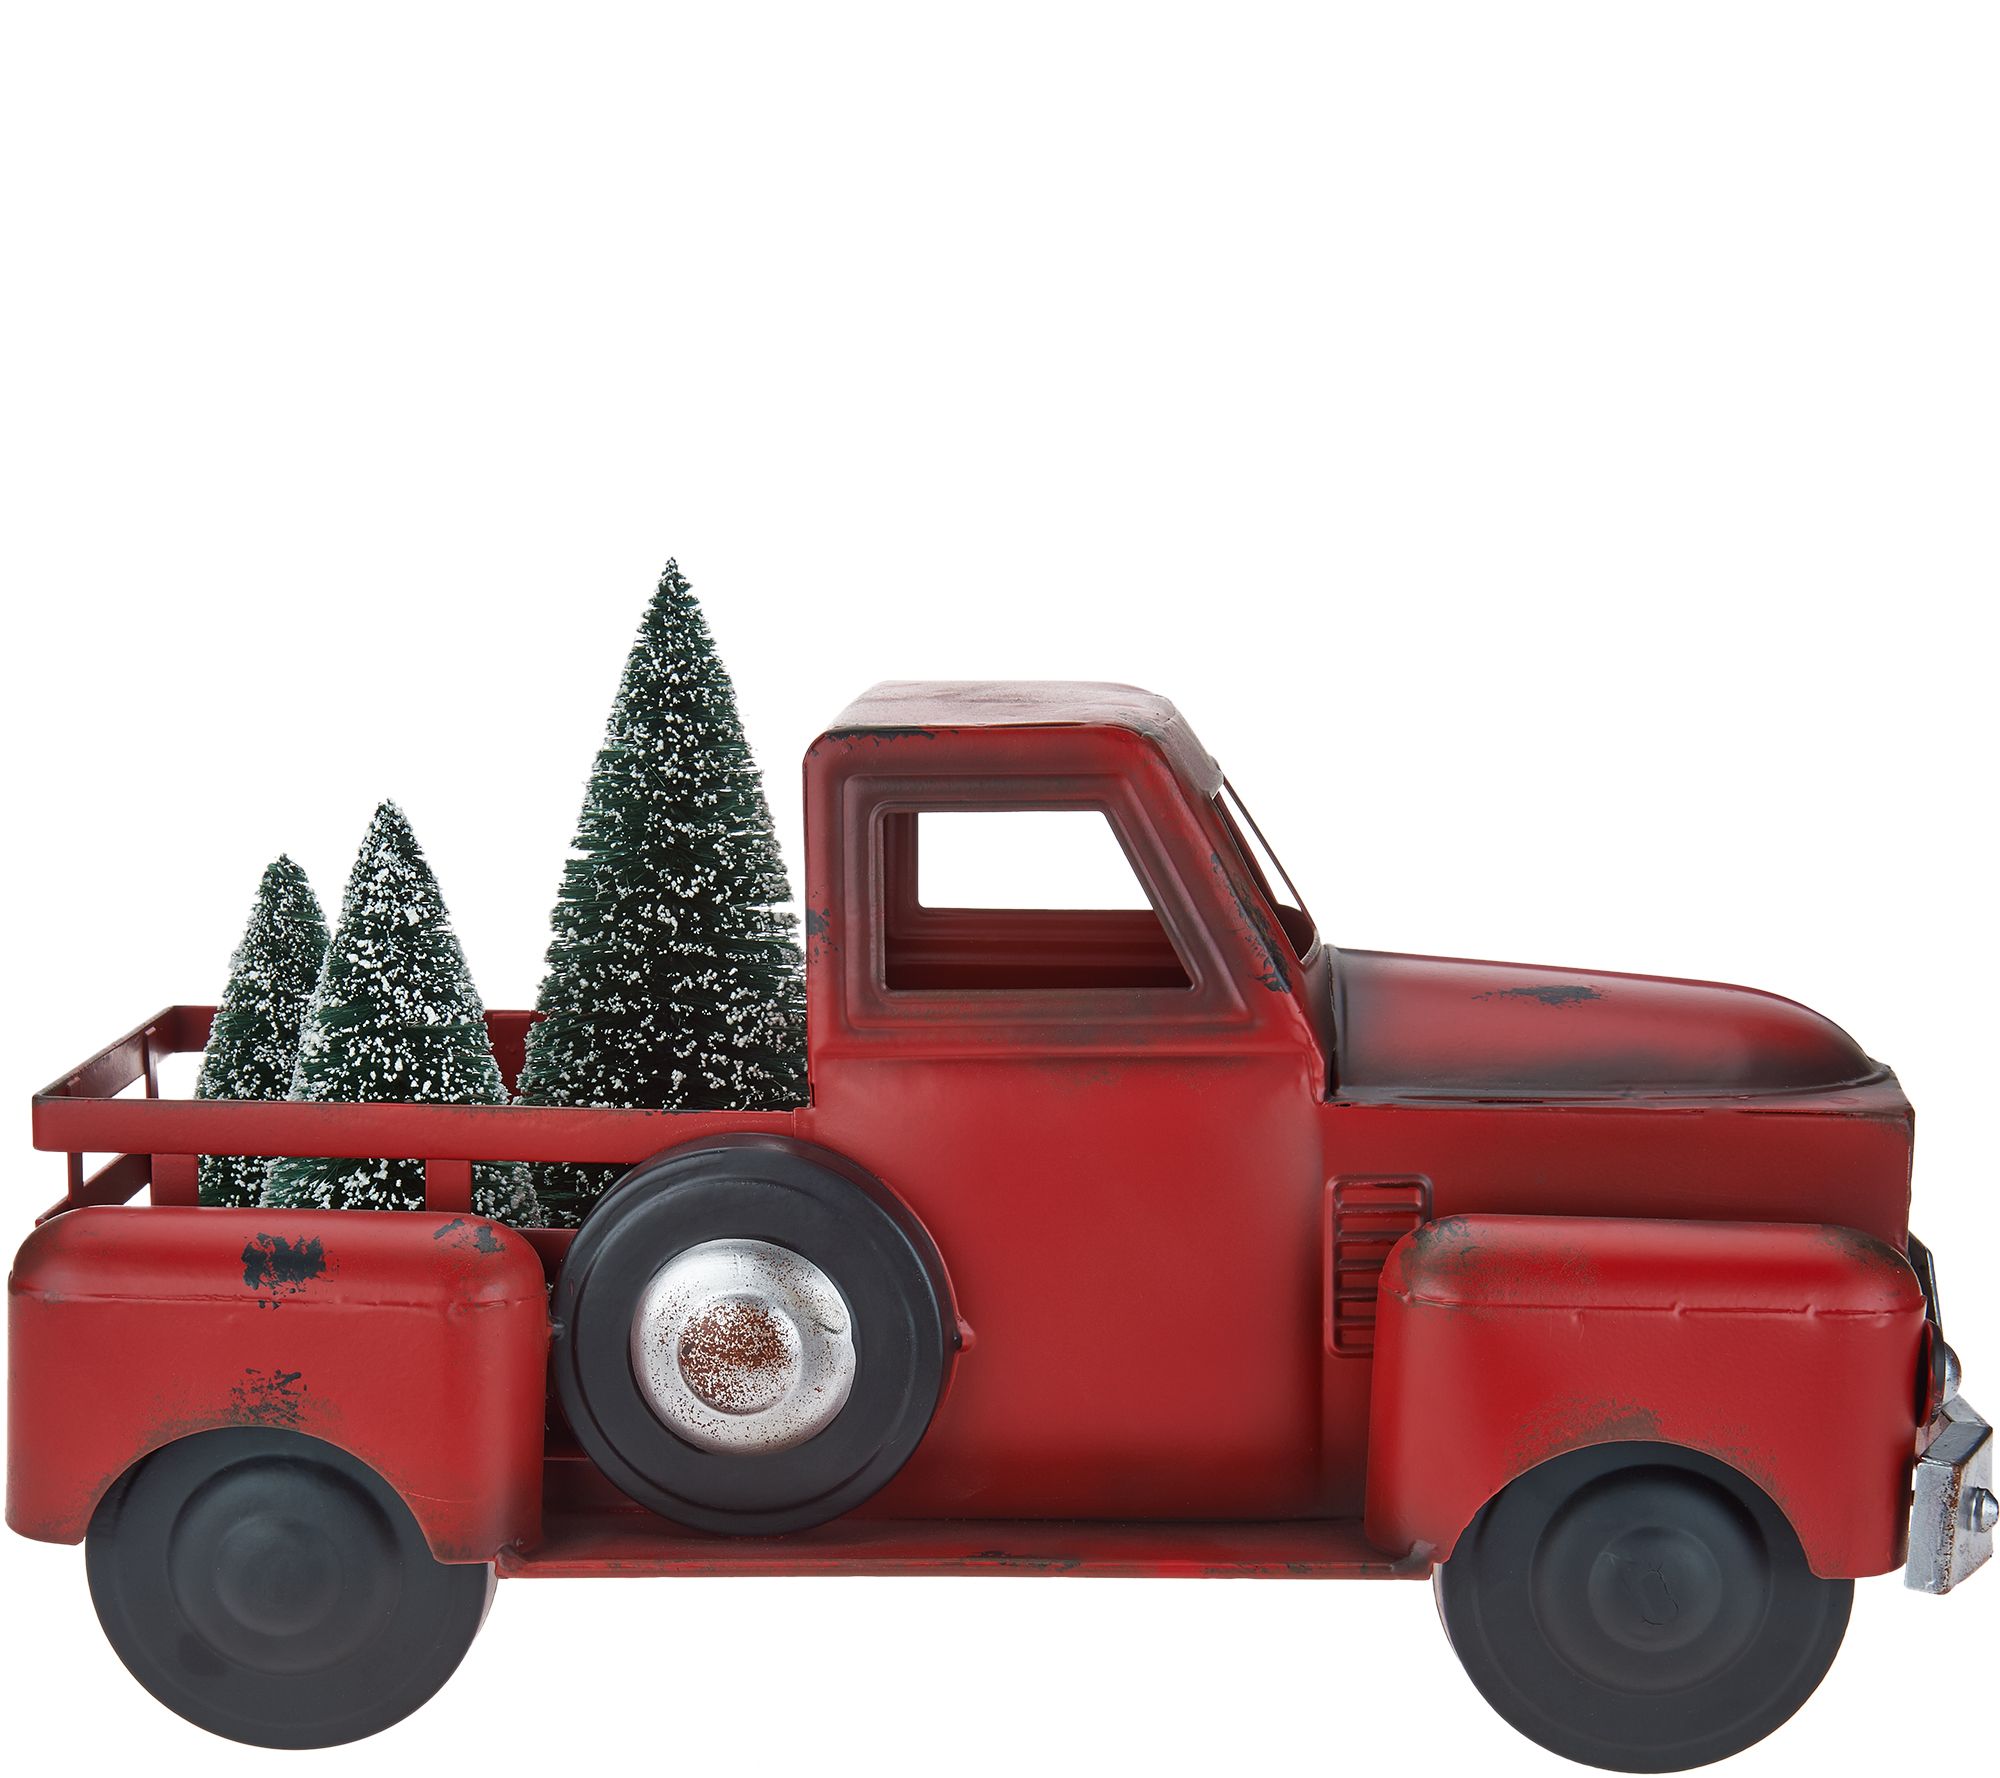 Details about   Red Metal Pickup Truck Qvc Valerie Parr Hill NEW Christmas Tree HUGE 17 1/2” 